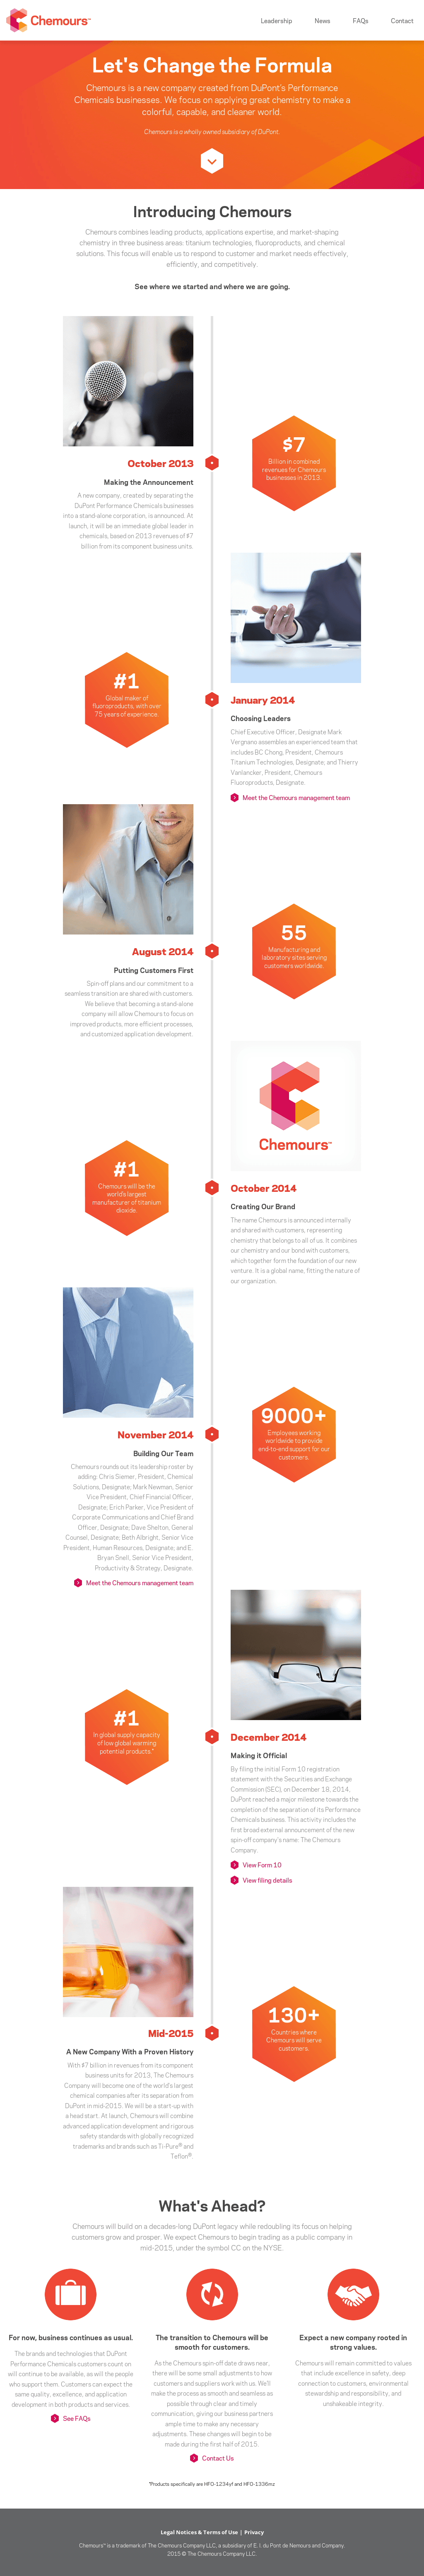 Chemours Logo - Chemours Competitors, Revenue and Employees Company Profile